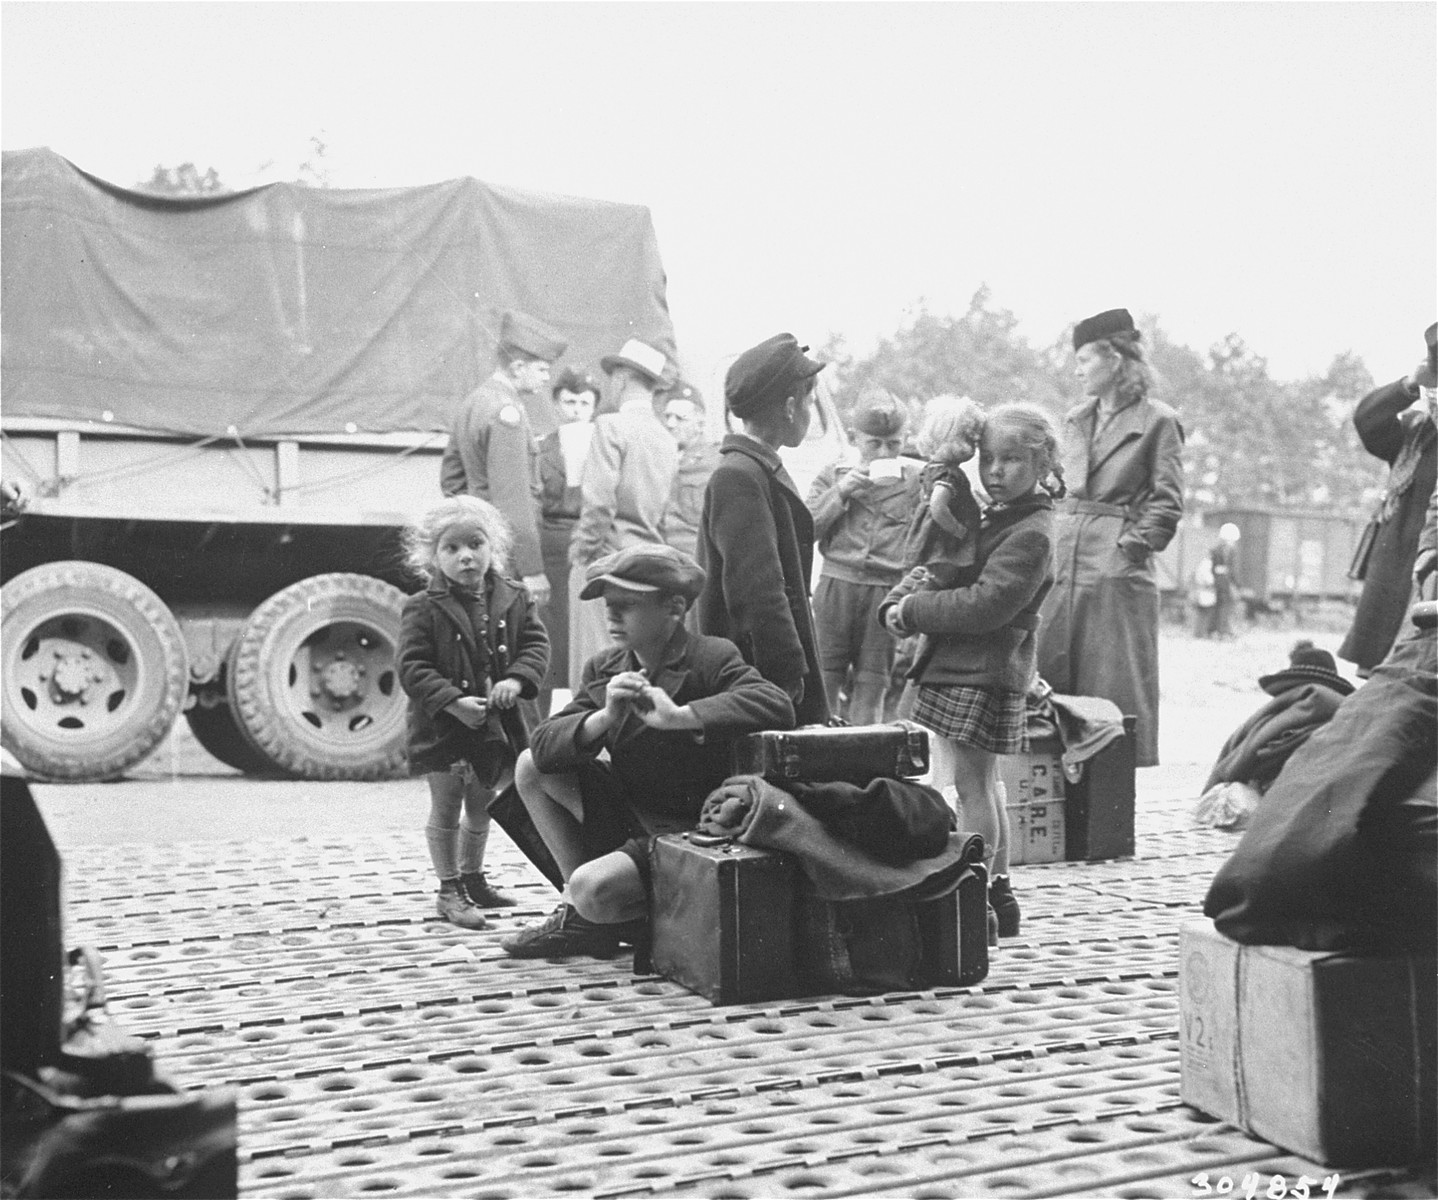 Jewish DPs who have been evacuated from Berlin to Frankfurt as a result of the Soviet blockade, wait at the Rhine Main Airfield for transport to displaced persons camps.

The original caption reads, "Jewish displaced persons arrive by plane at the Rhine Main Airfield, Frankfurt, Germany, from the blockaded city of Berlin, on operation "Vittles".  150 came in the first group, and 180 are expected to arrive on July 24, 1948. Most of these DPs have been granted visas by the new State of Israel, and will go to DP camps in the U.S. zone to await shipment to Palestine, while others will leave for Canada, France and the U.S.. Here DPs wait for trucks to arrive to carry them to trains."